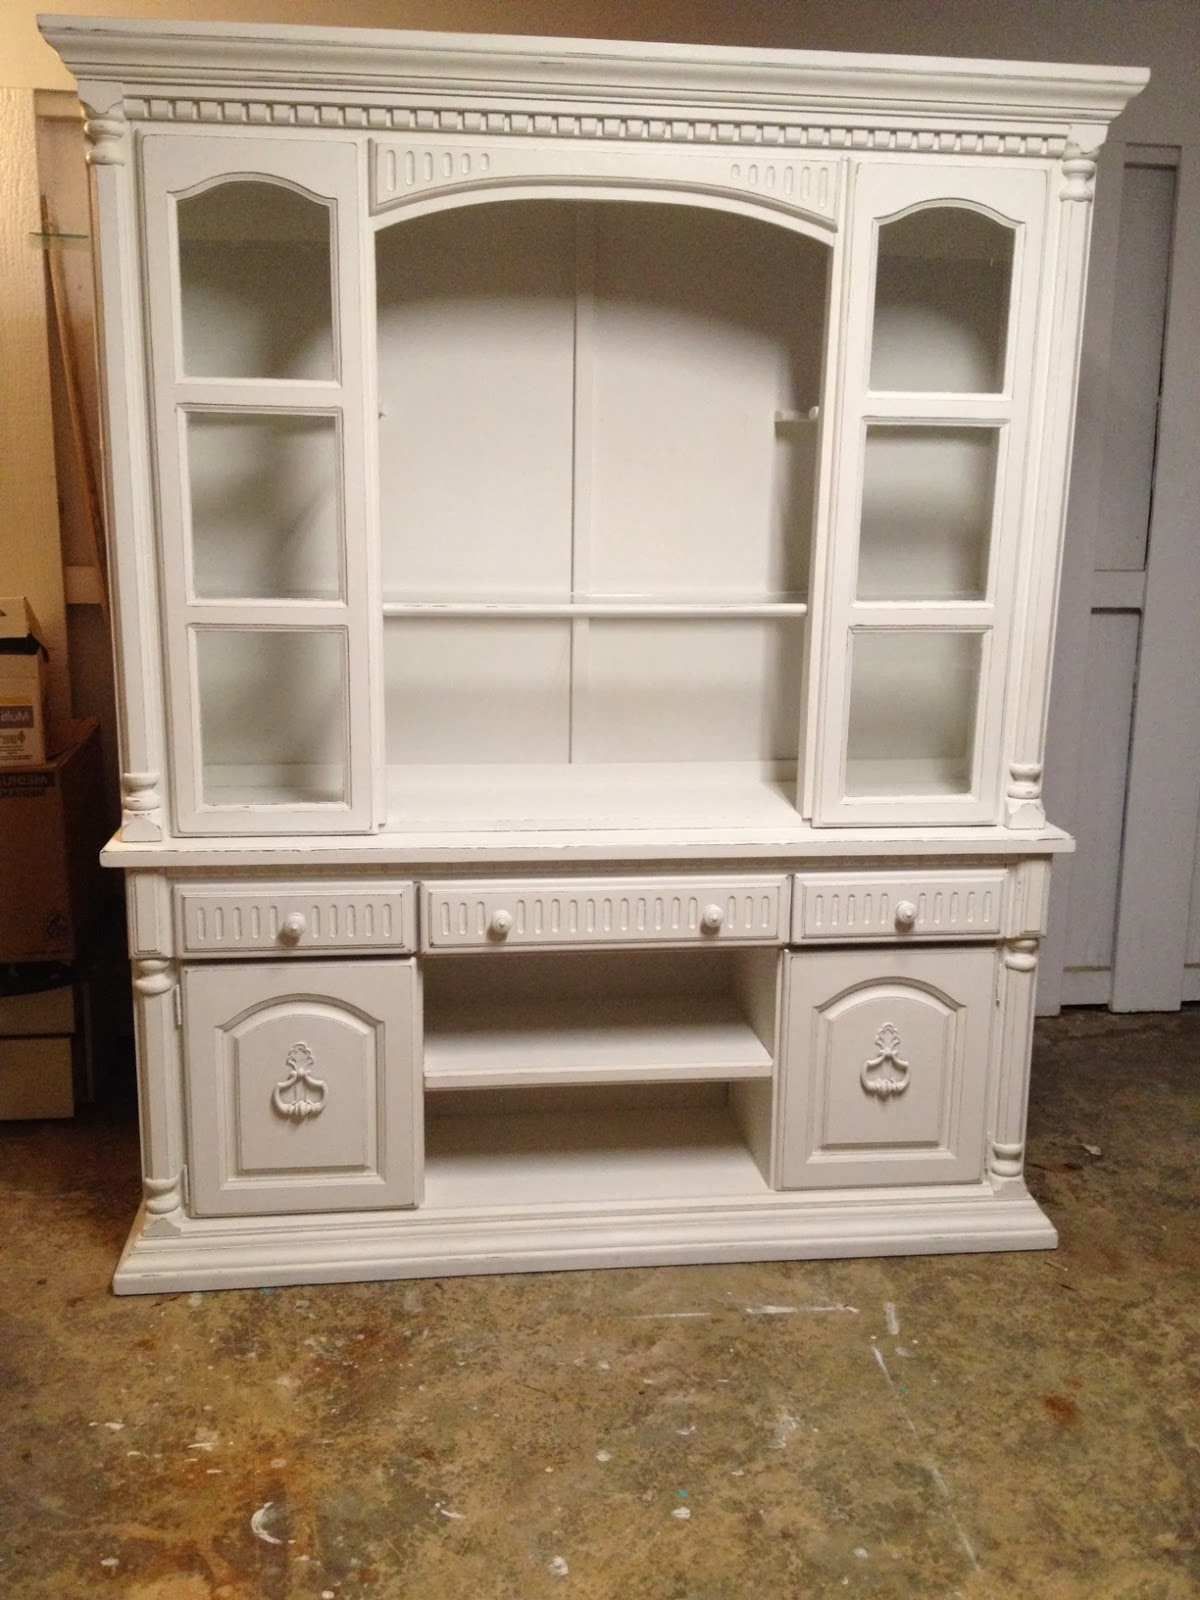 Creative Tv Wall Cabinet With Doors With Vintage White Enclosed Tv Intended For Popular Enclosed Tv Cabinets With Doors (View 20 of 20)